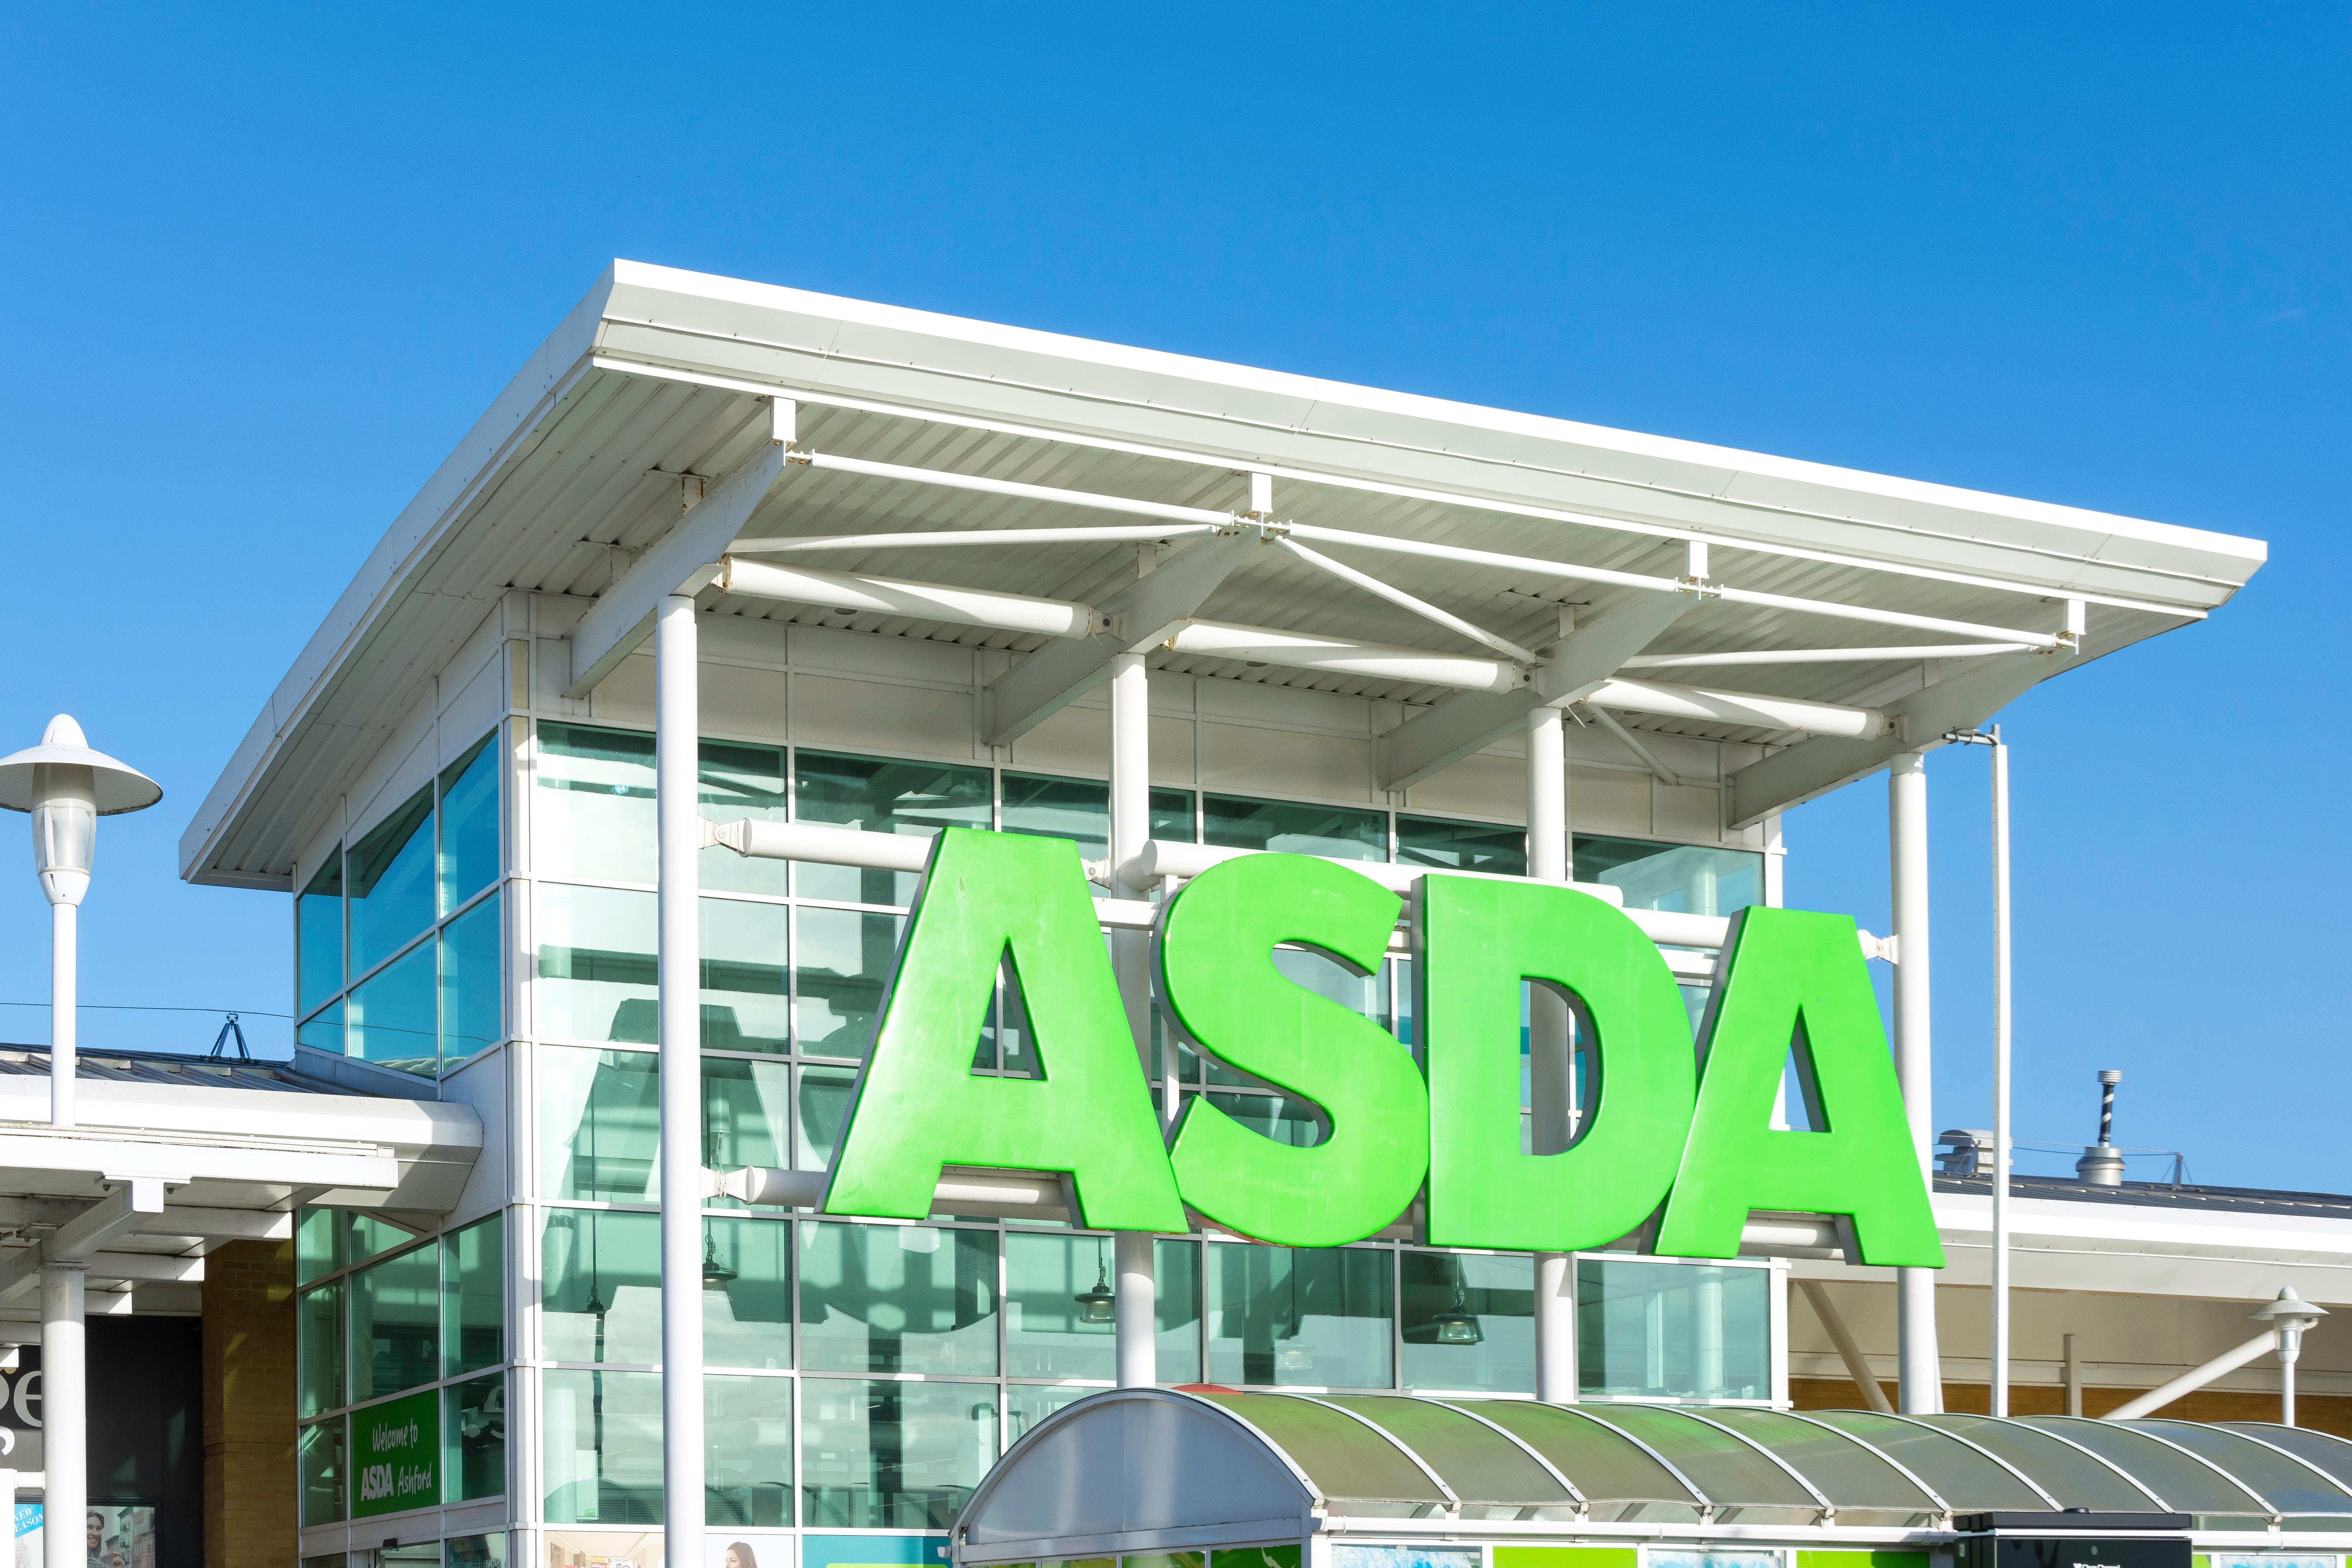 Anger as Asda customers are limited on how many Just Essentials